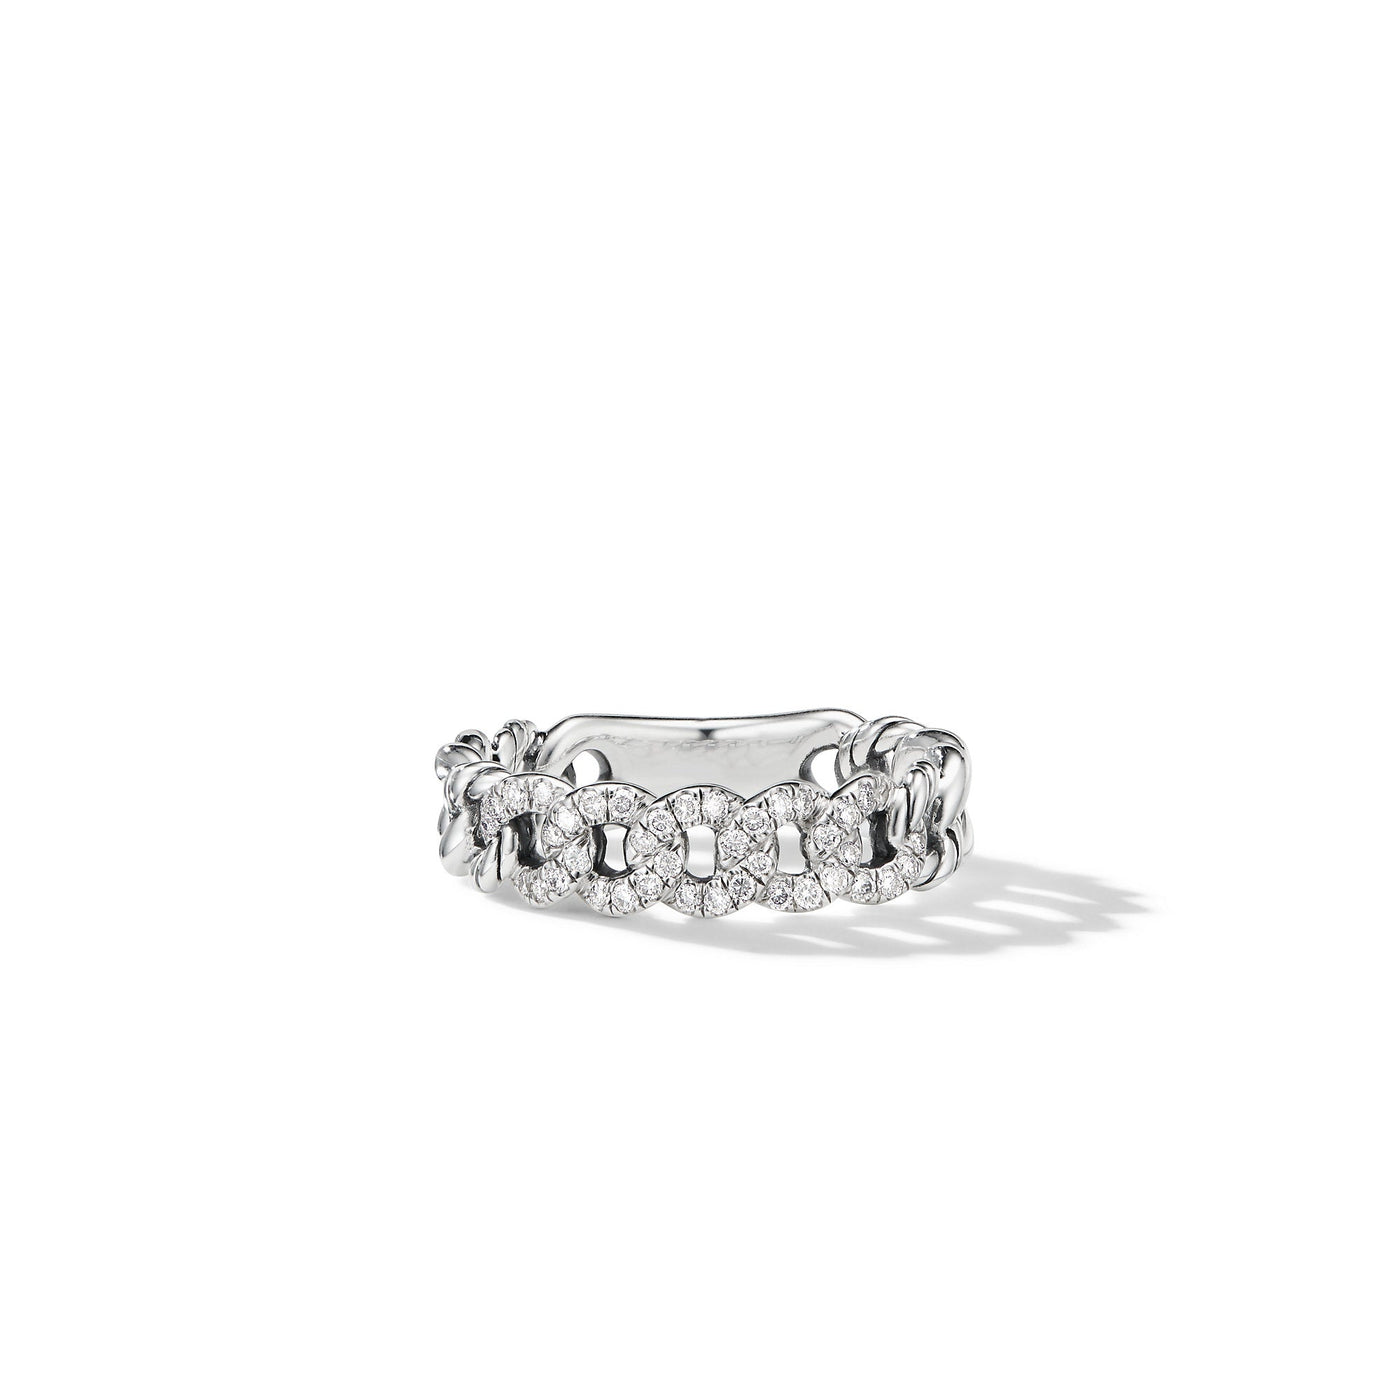 Belmont® Curb Link Band Ring in Sterling Silver with Diamonds\, 5mm